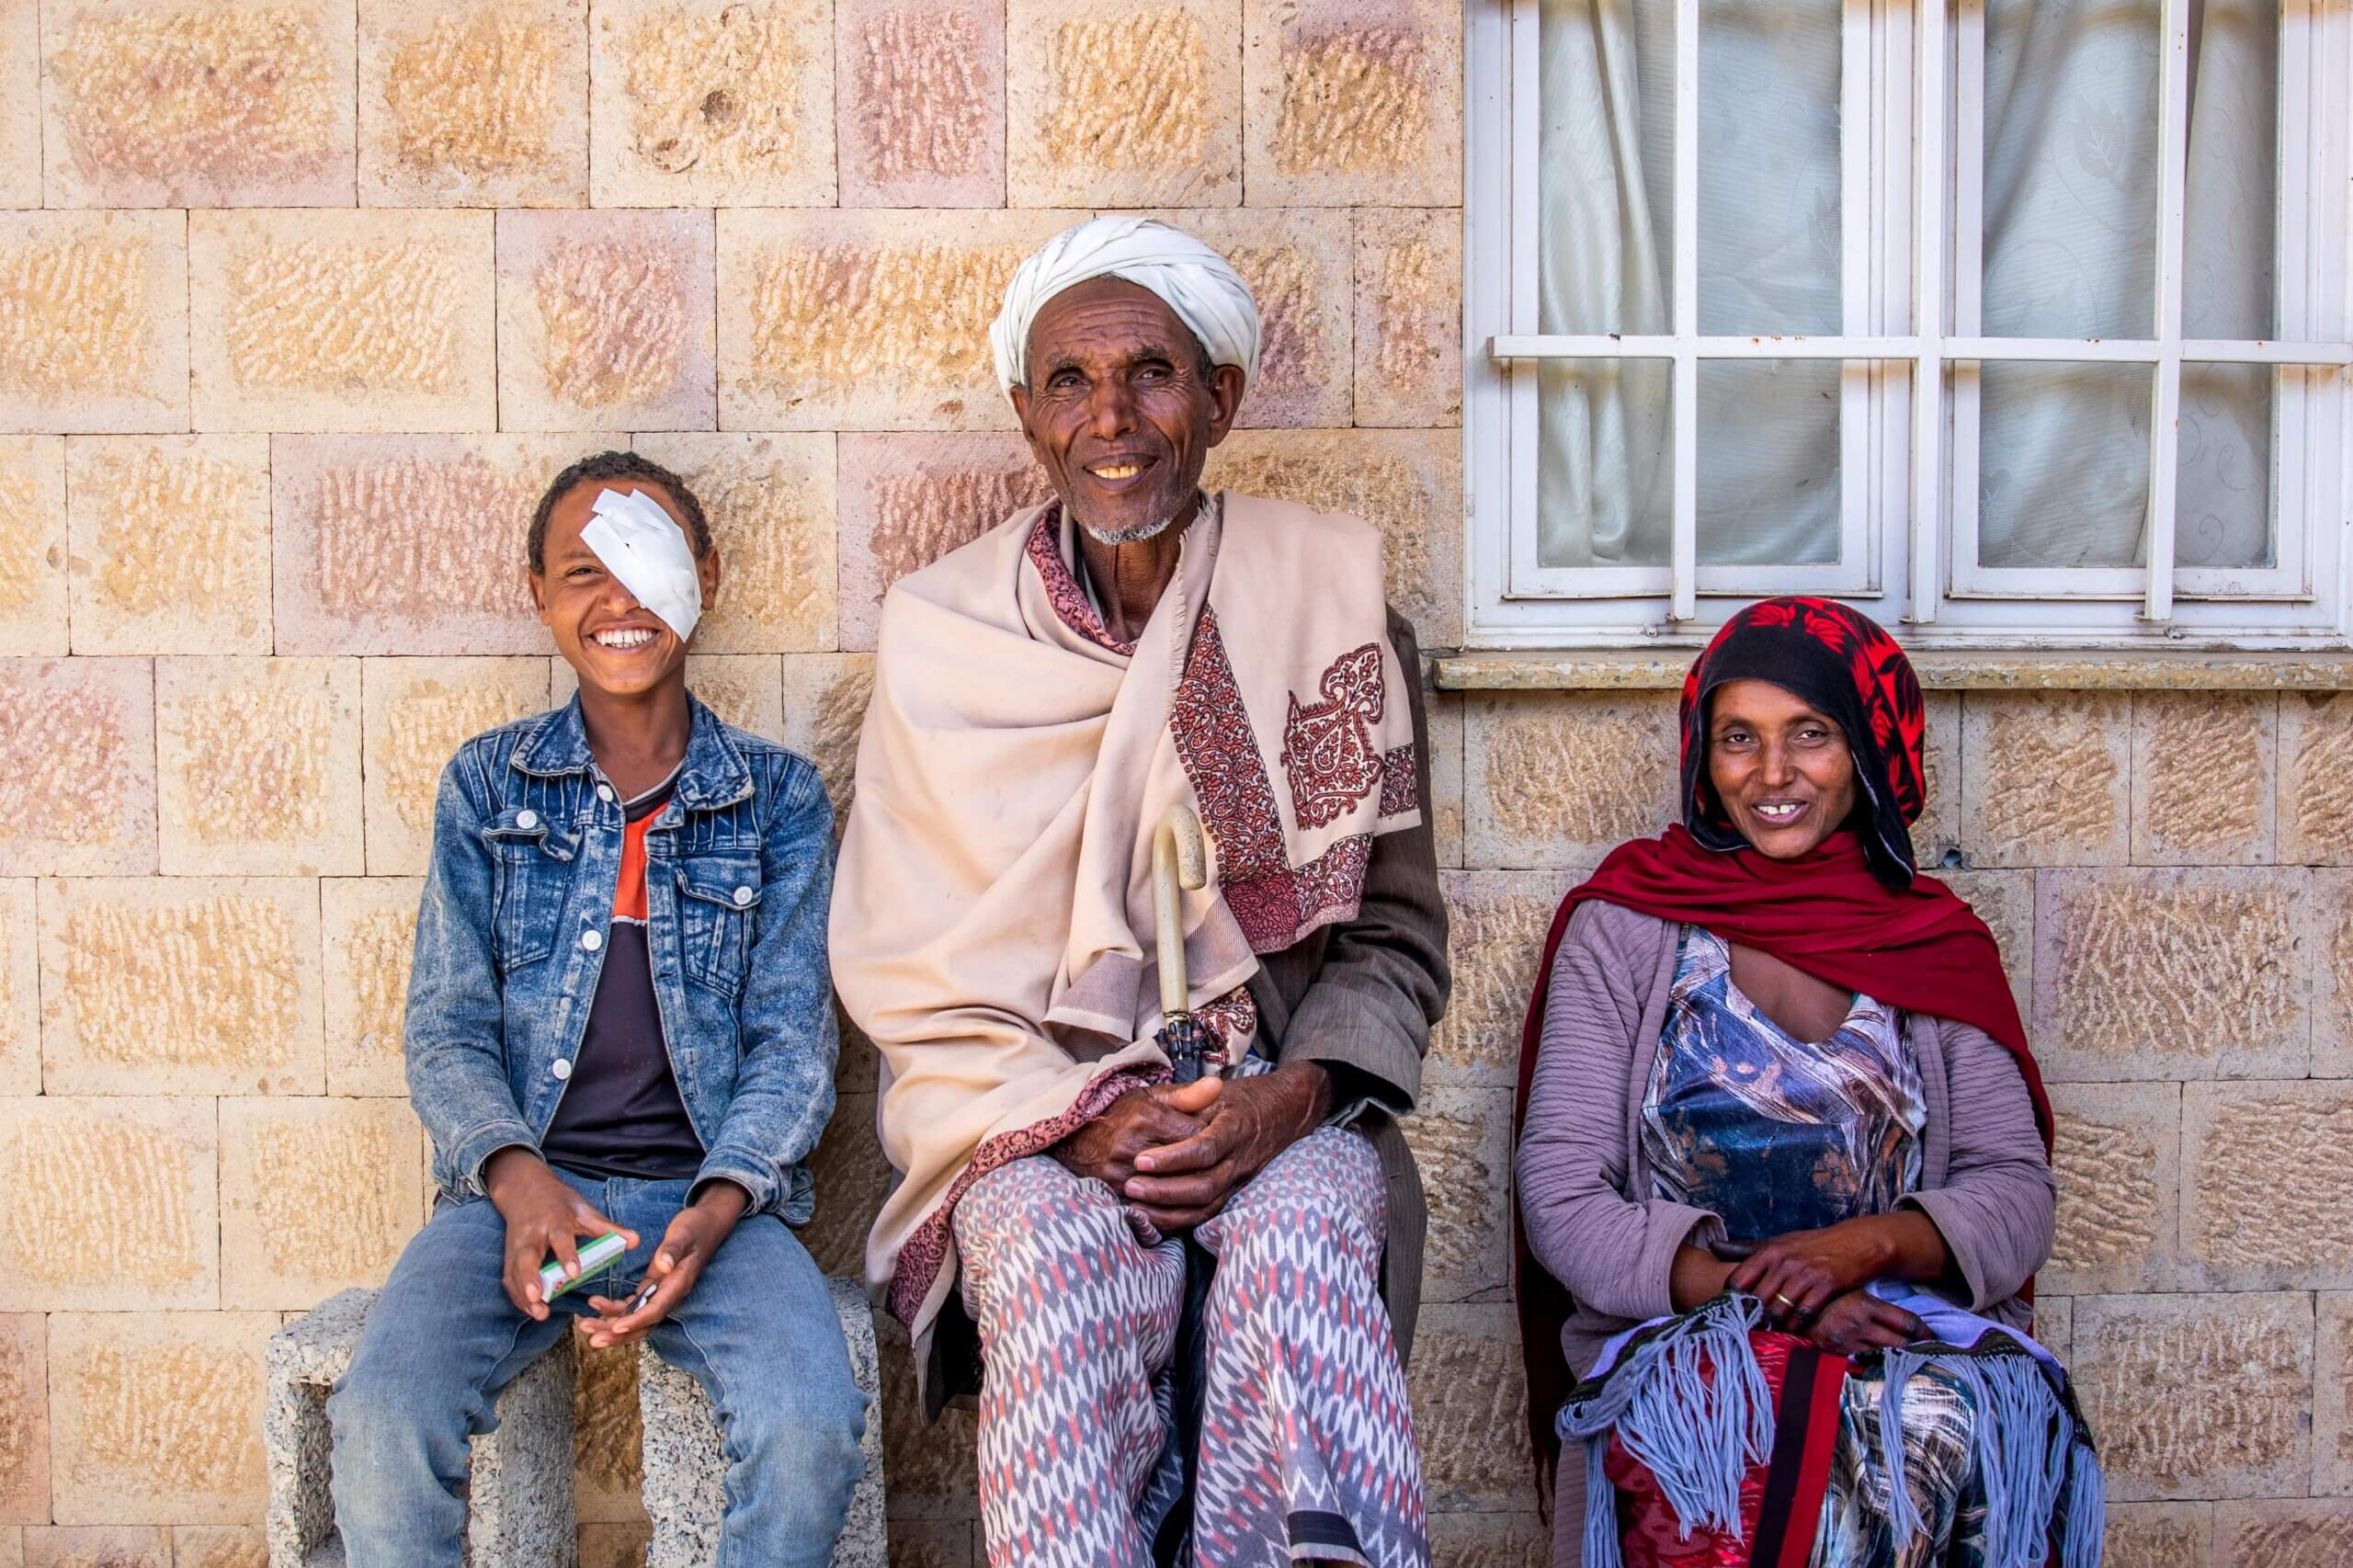 There are three people in the image, sitting in front of a wall. The boy is on the left, wearing a bandage over his eye, with his family on the right. They are all smiling.